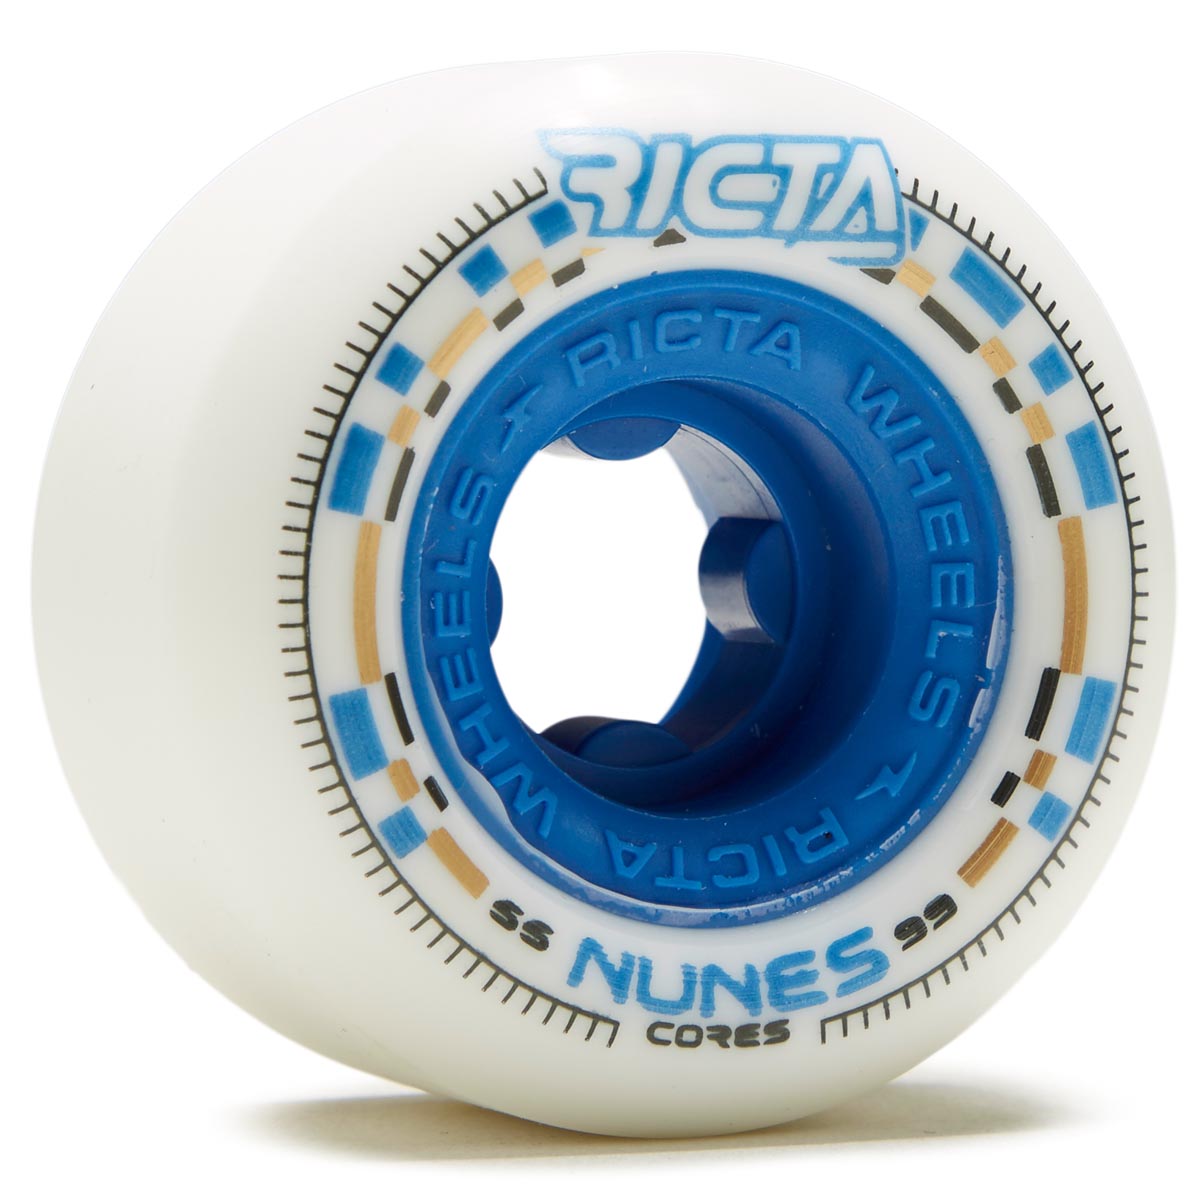 Ricta Nunes Cores Wide 99a Skateboard Wheels - White - 55mm image 1